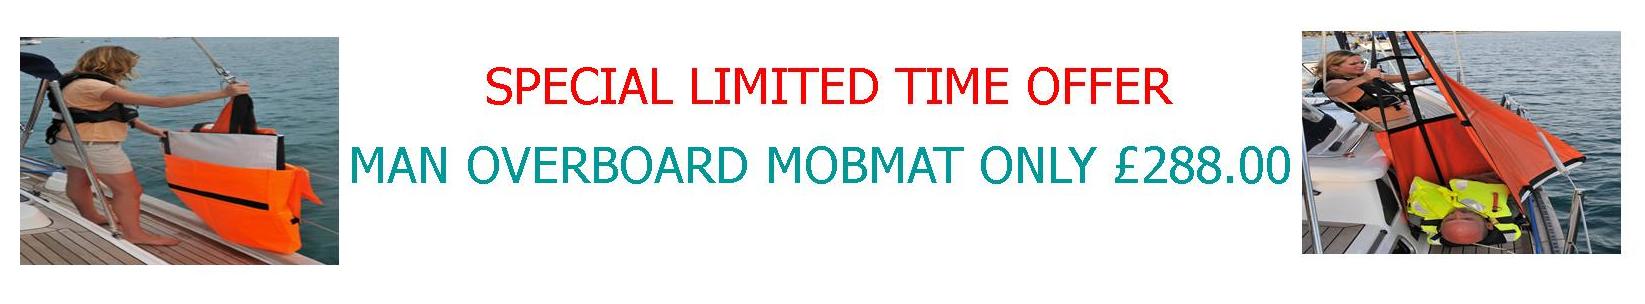 Mobmat Special Offer